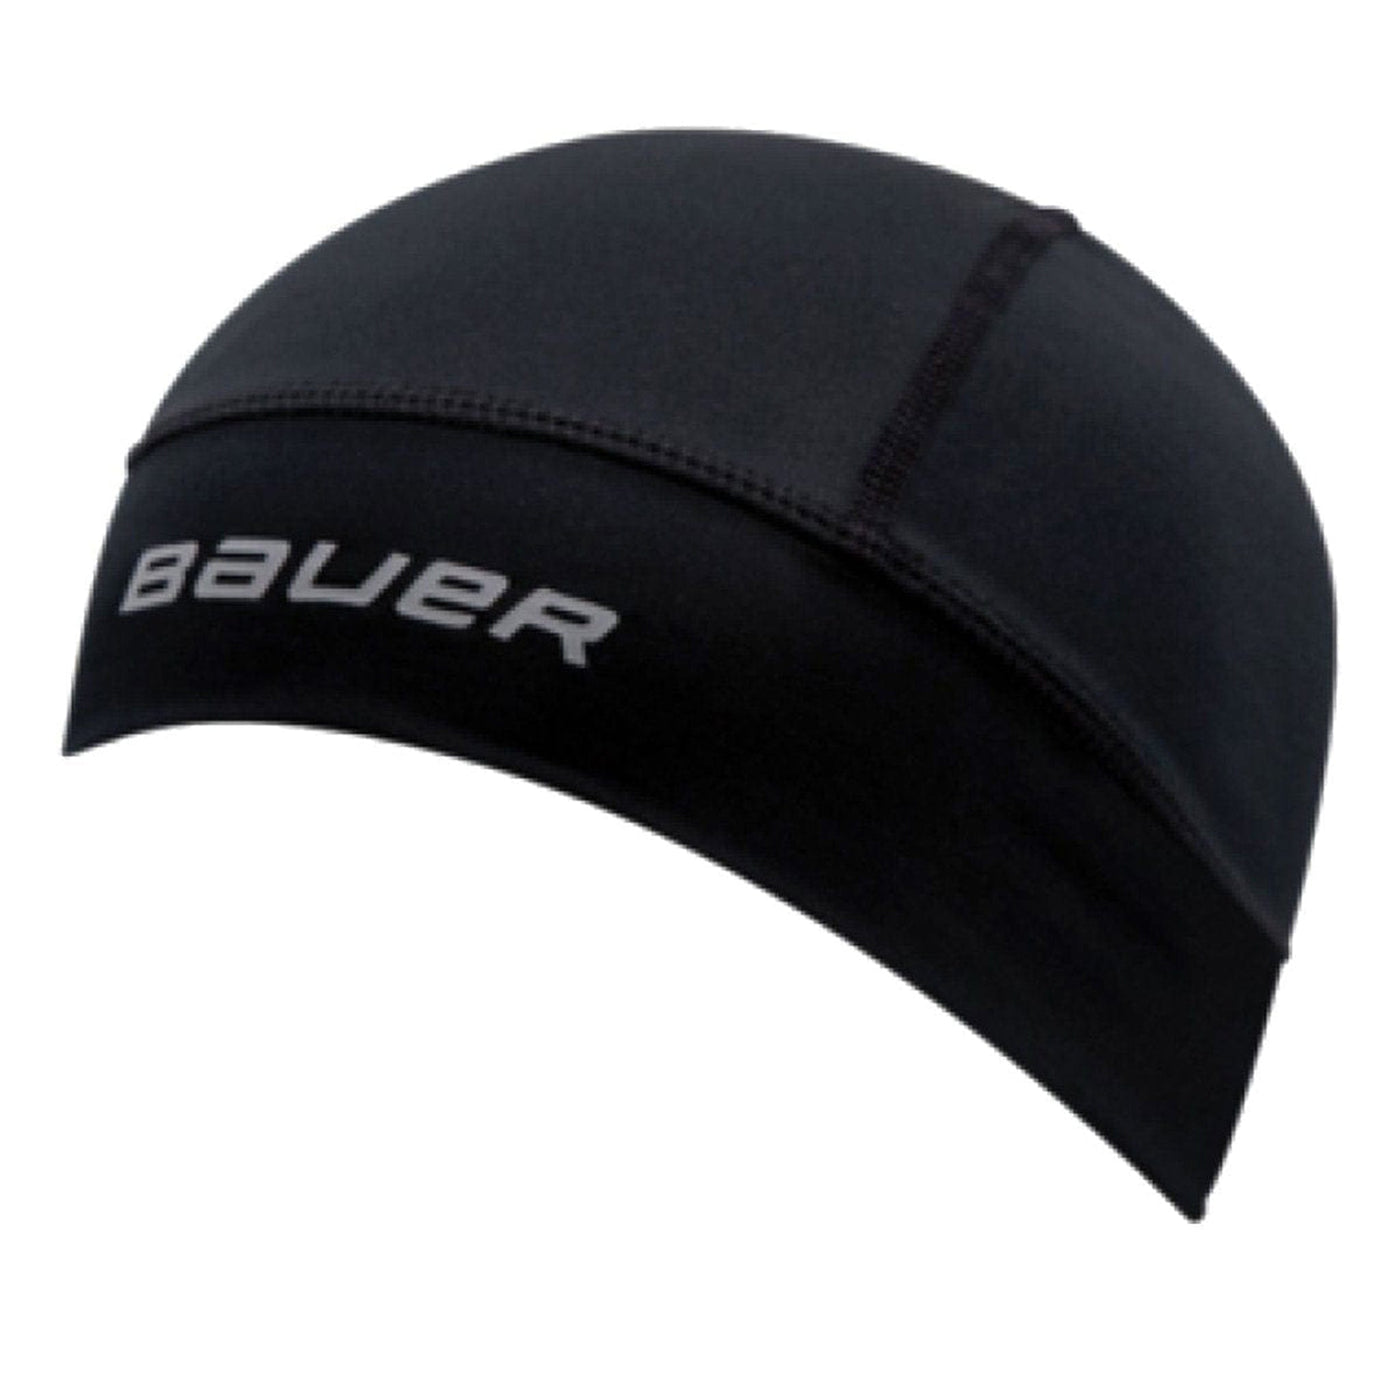 Bauer Performance Skull Cap - The Hockey Shop Source For Sports